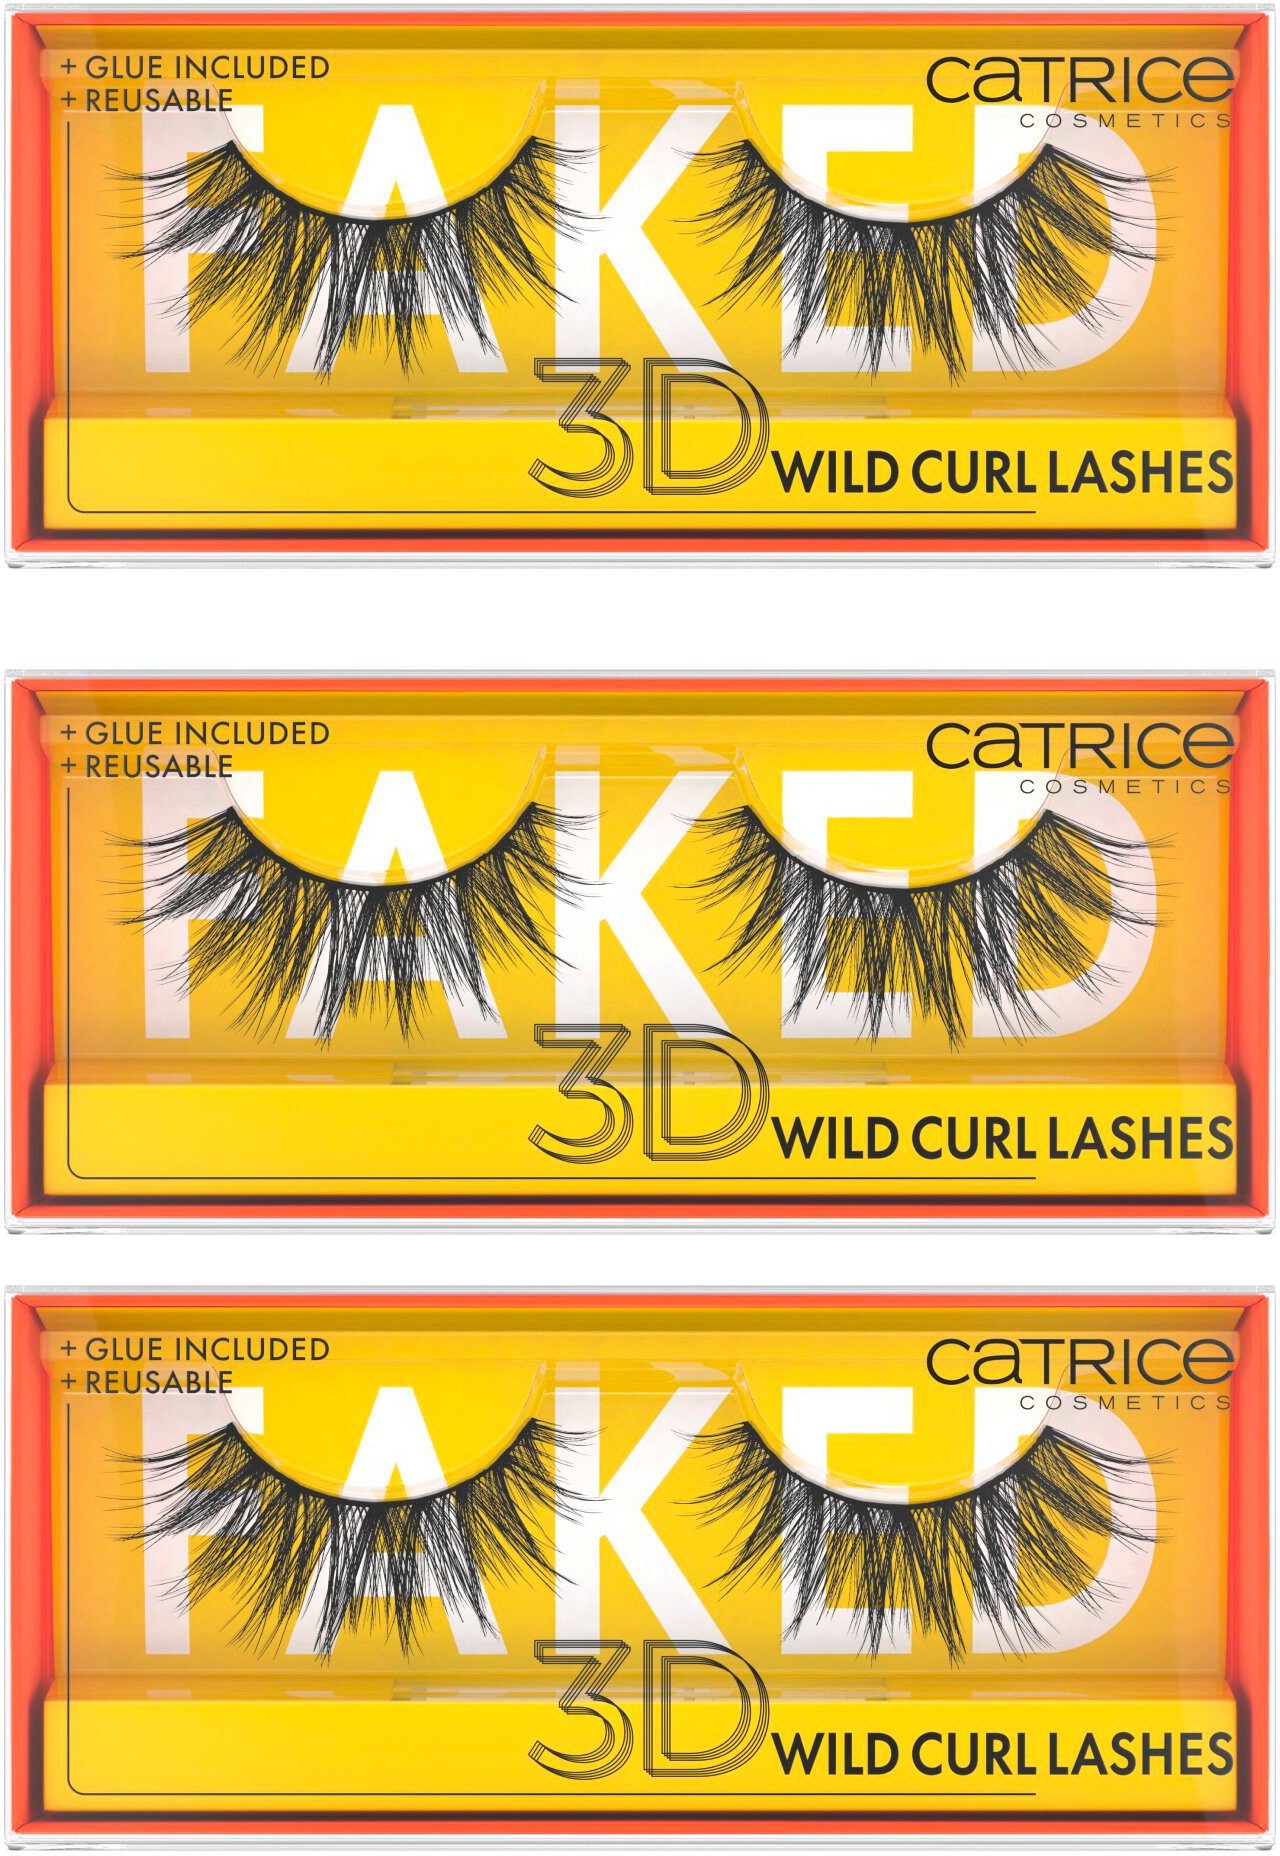 3 tlg. Bandwimpern Wild Catrice Lashes, Set, Curl Faked 3D